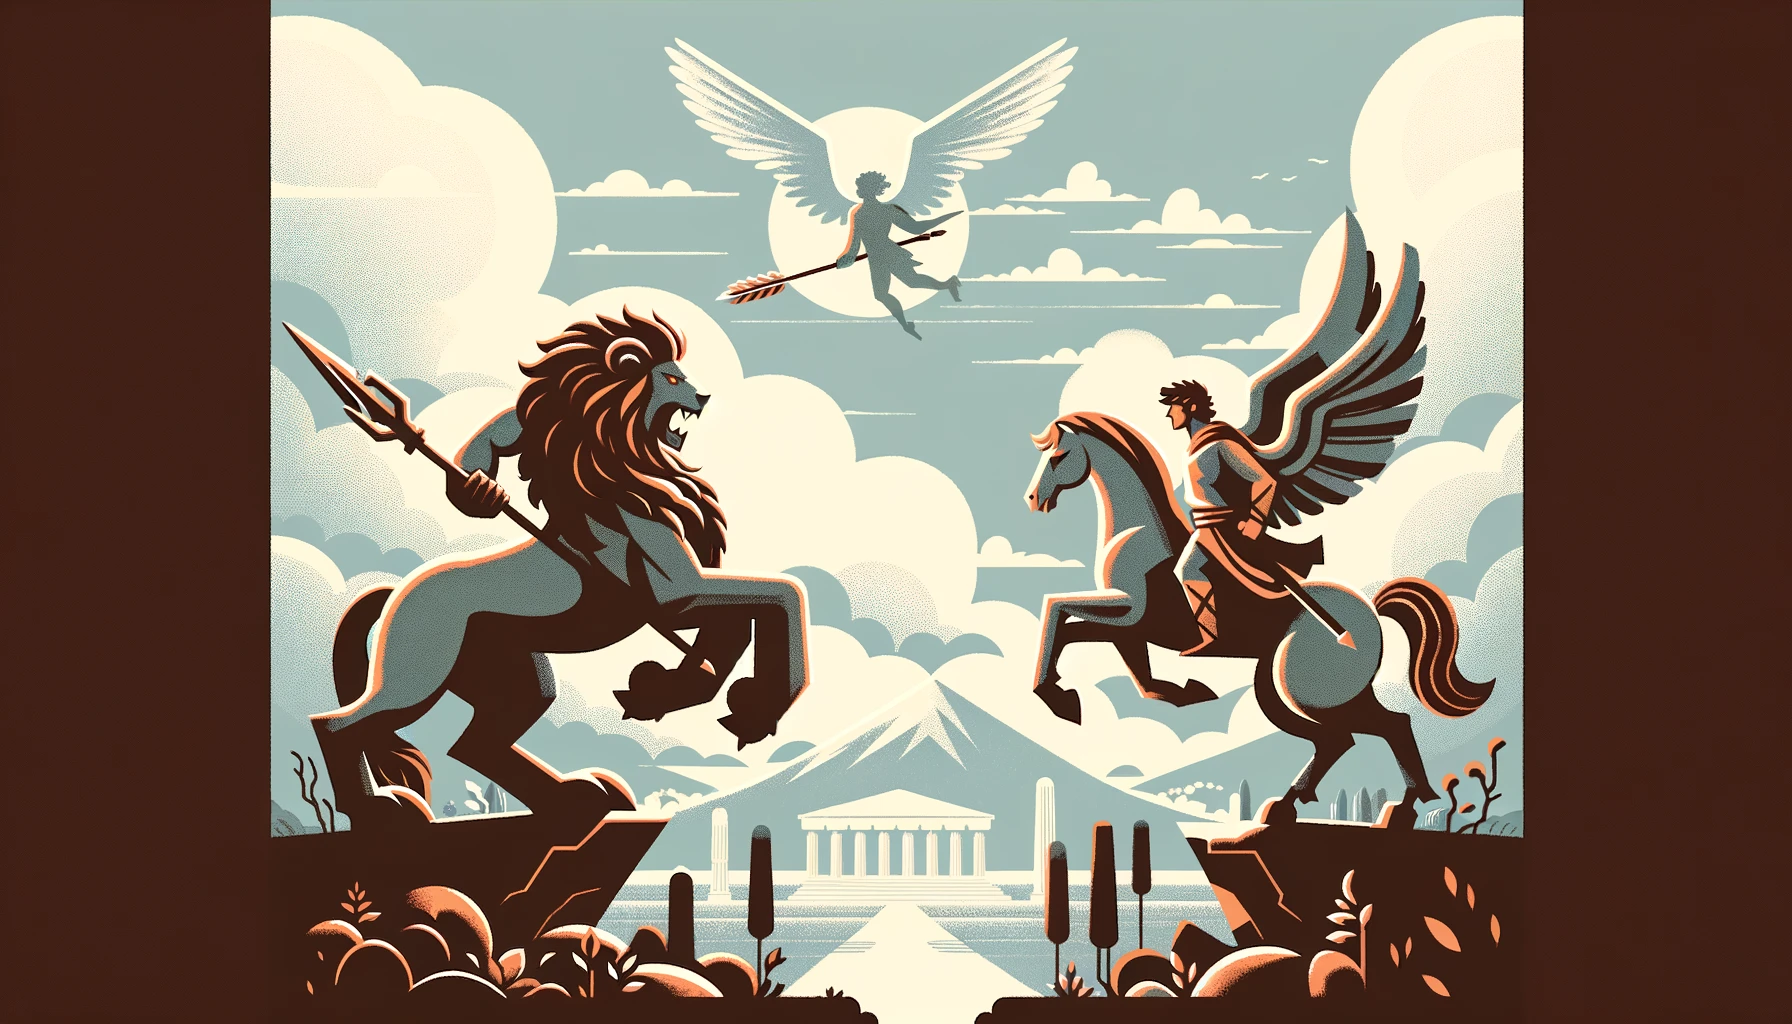 Heracles vs Bellerophon: Bravery and Strength vs Mythical Beasts